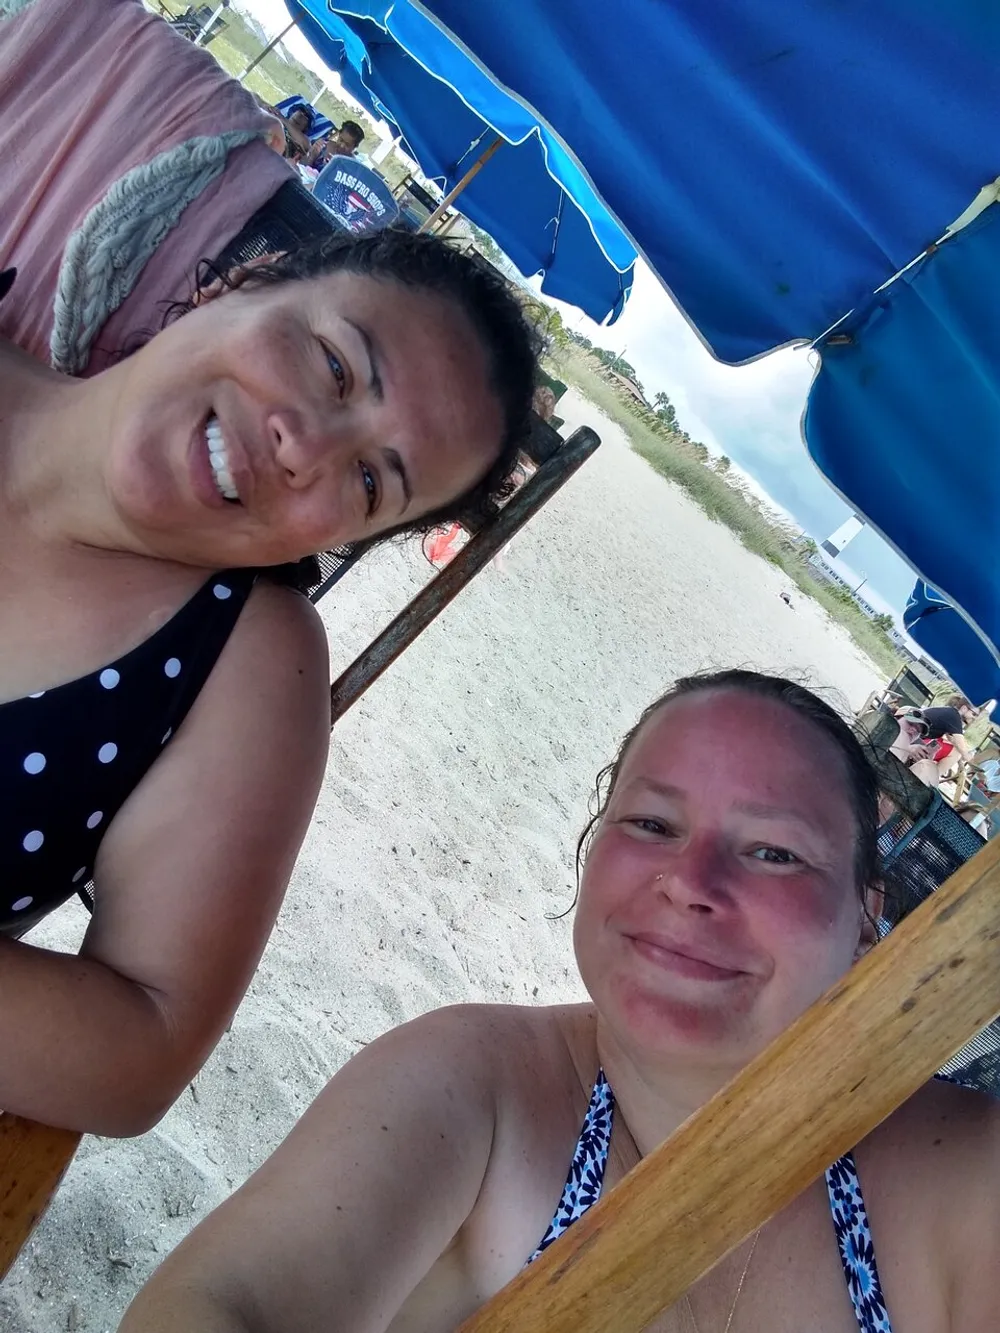 Two smiling individuals are taking a selfie under blue beach umbrellas on a sandy shore